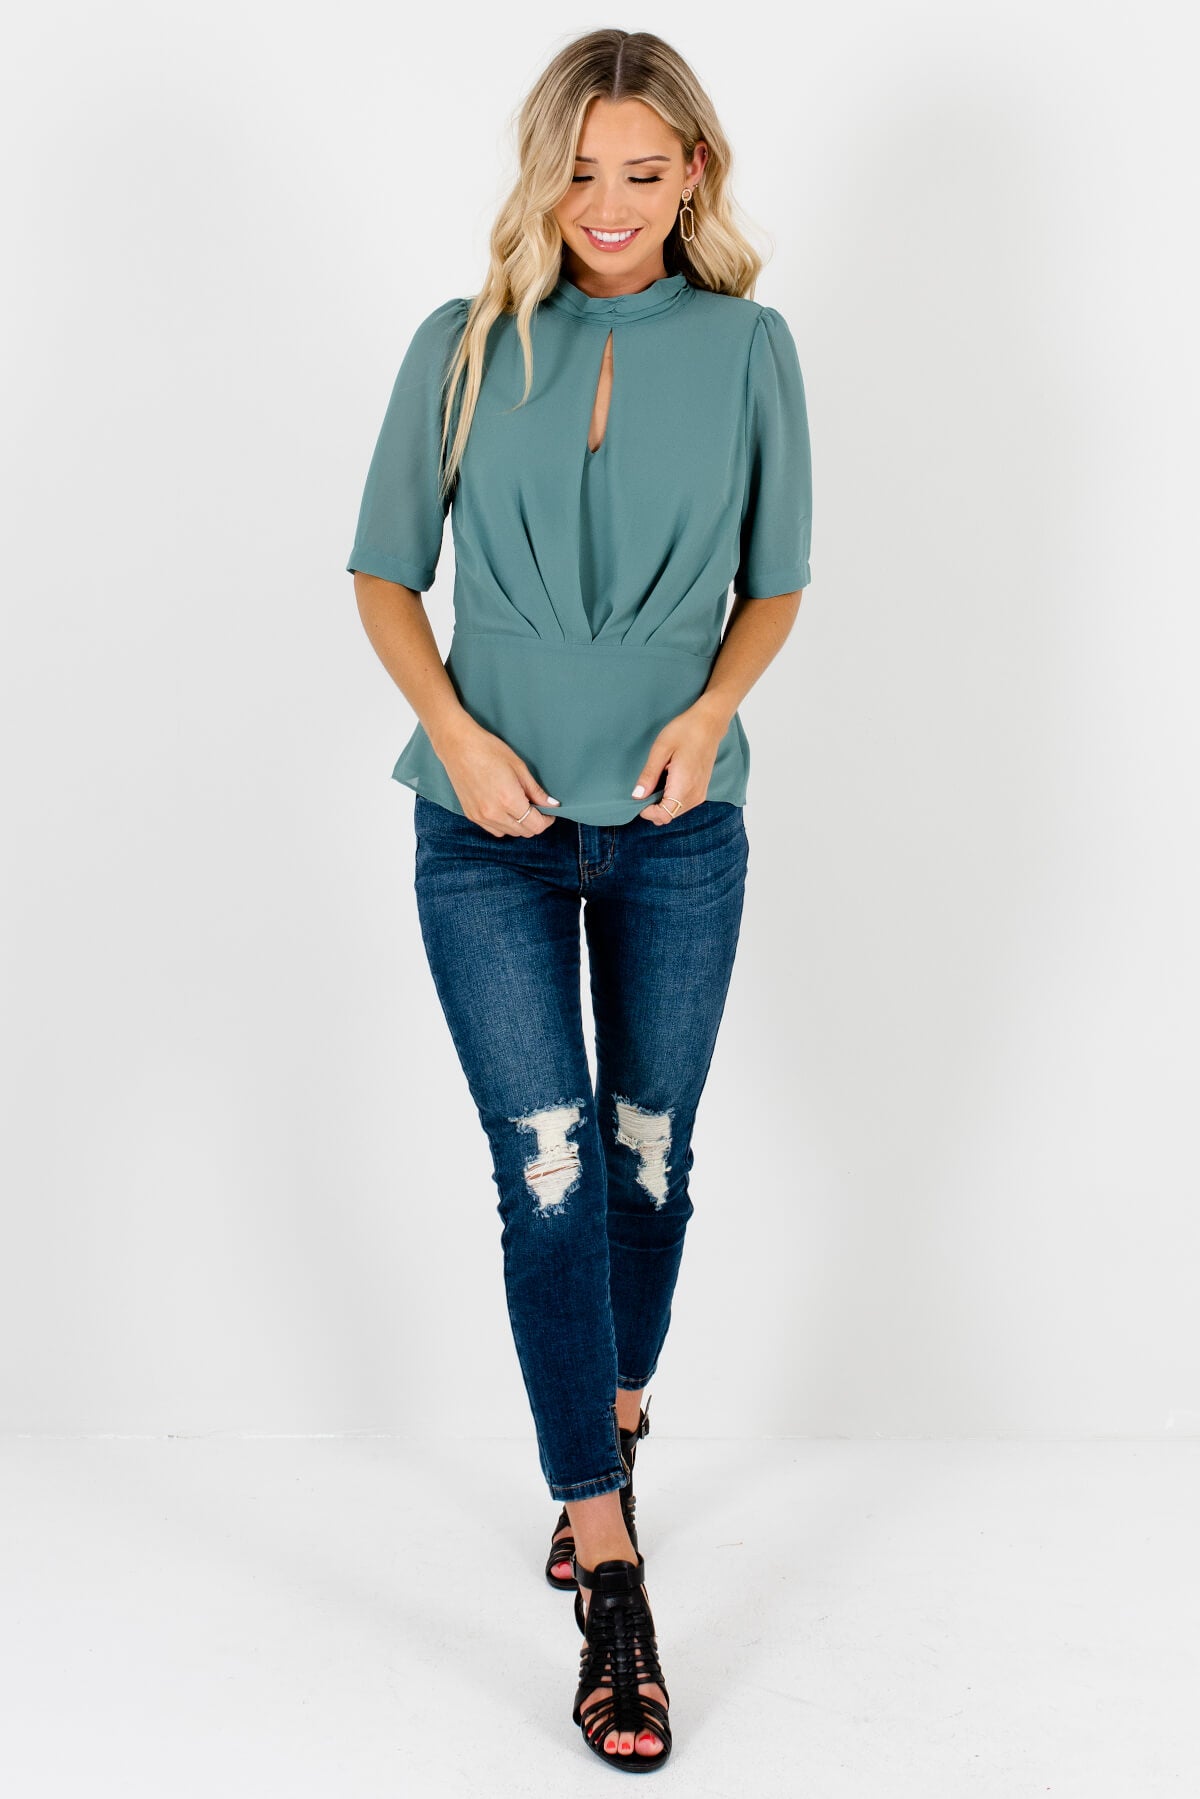 Green Cute and Comfortable Boutique Blouses for Women